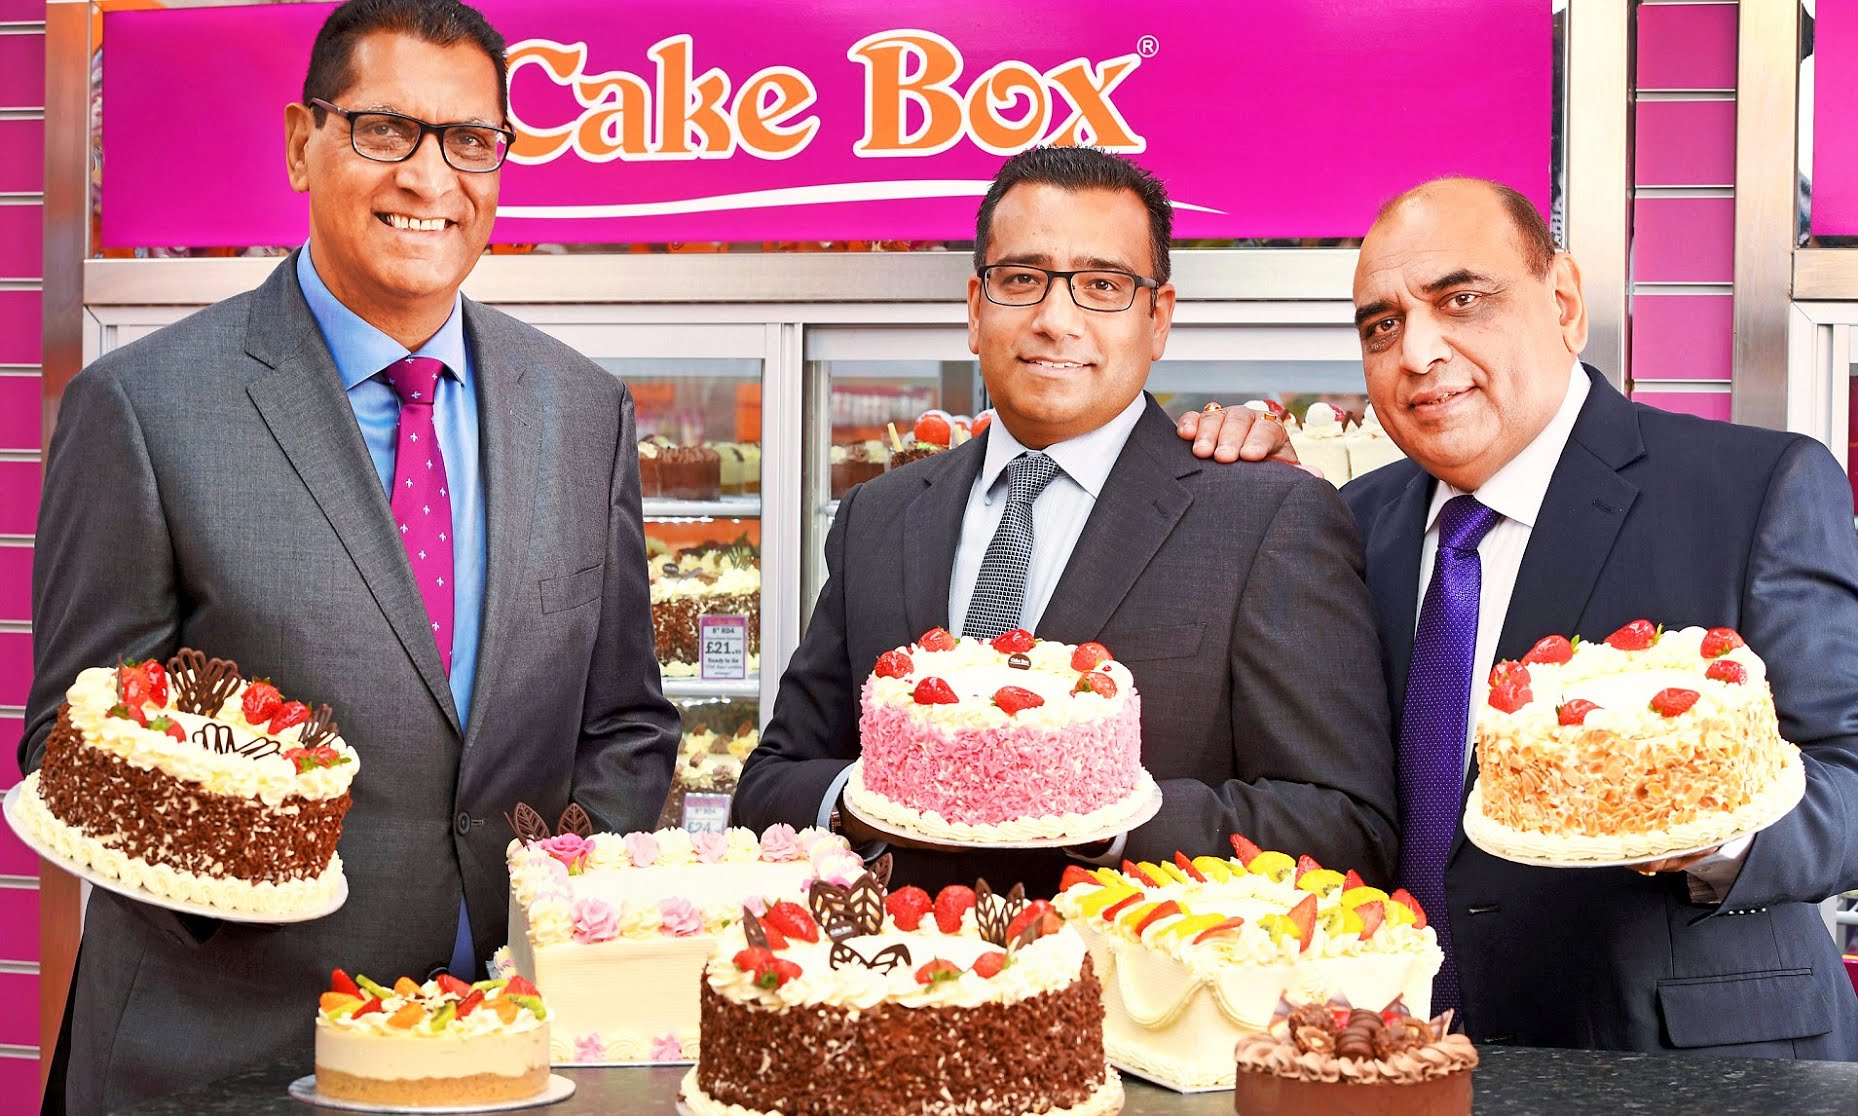 On Not Finding A Veg Cake For Their Family - Cousins Build A 630 Cr Cake Company From Scratch